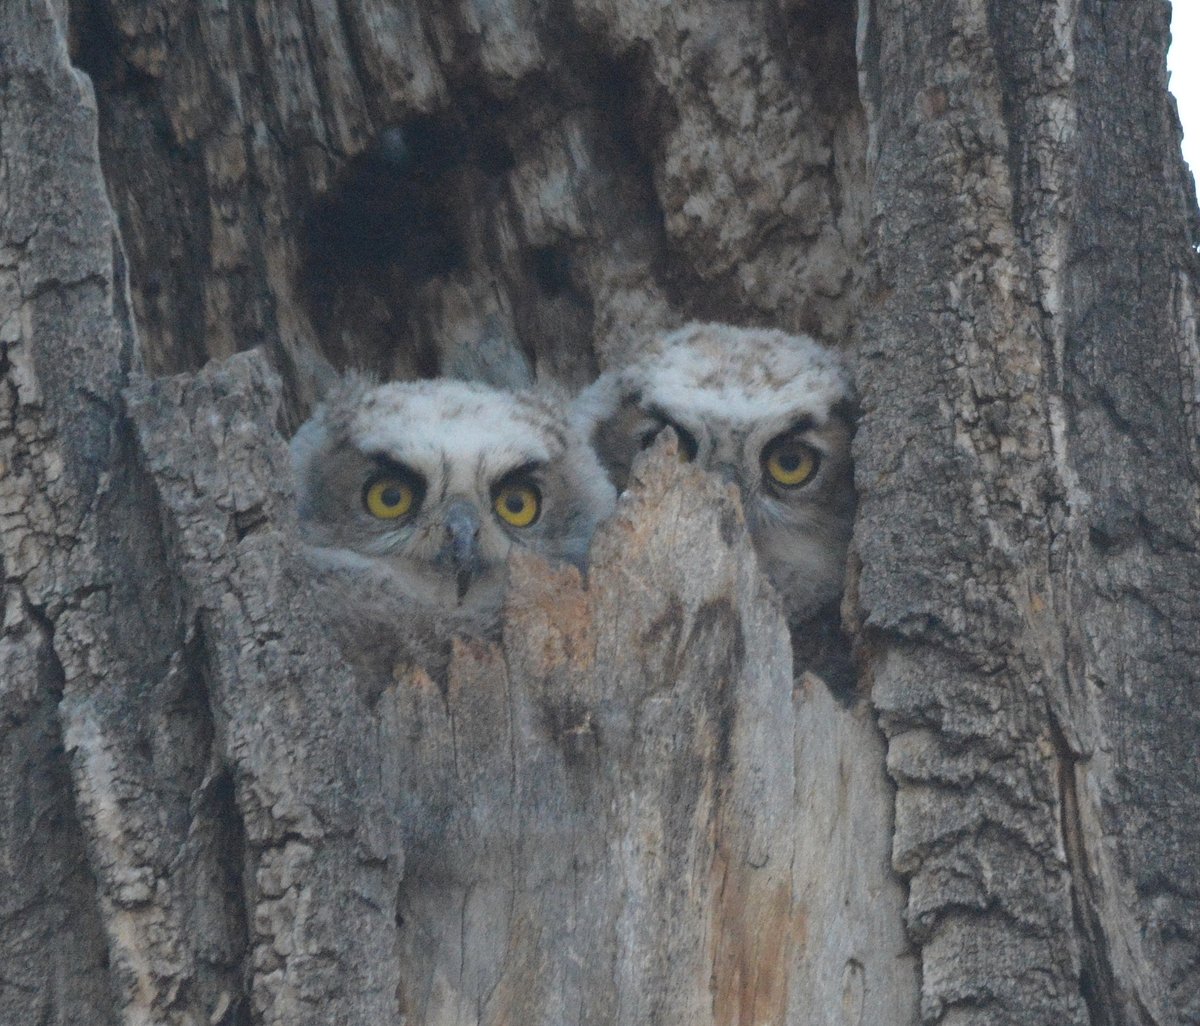 More precious moments with the owlets.
#owls #nature #preciousmoments